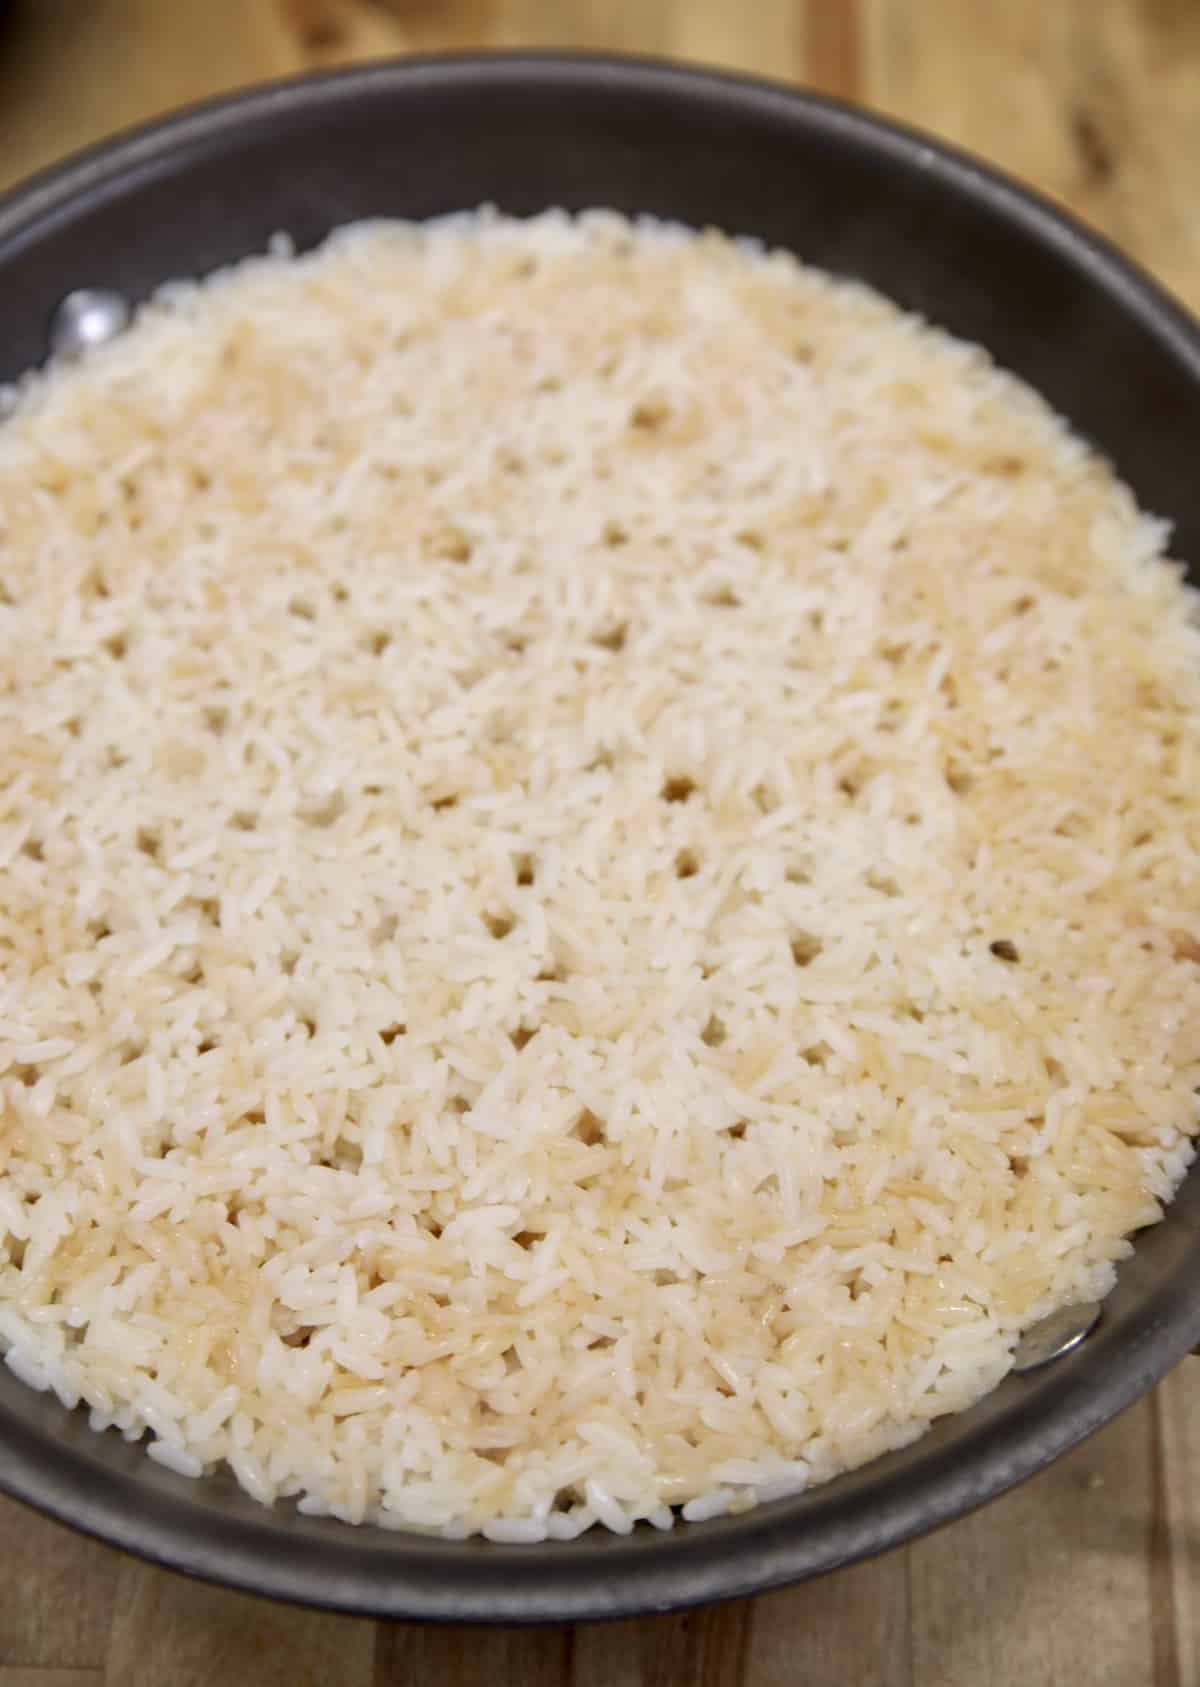 Cooked rice in a pan.